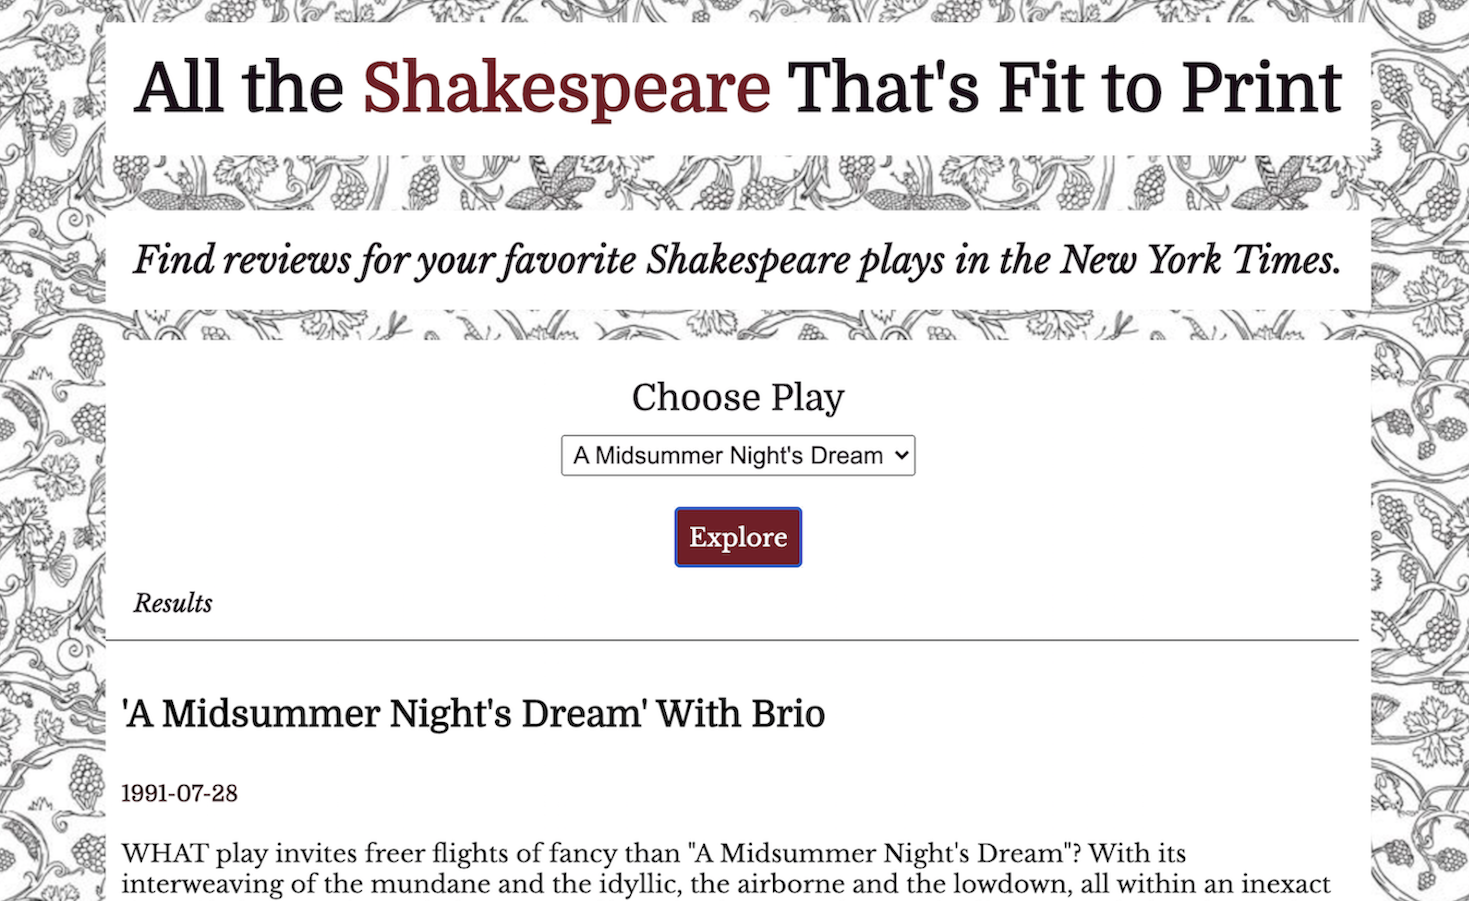 Shakespeare in the New York Times